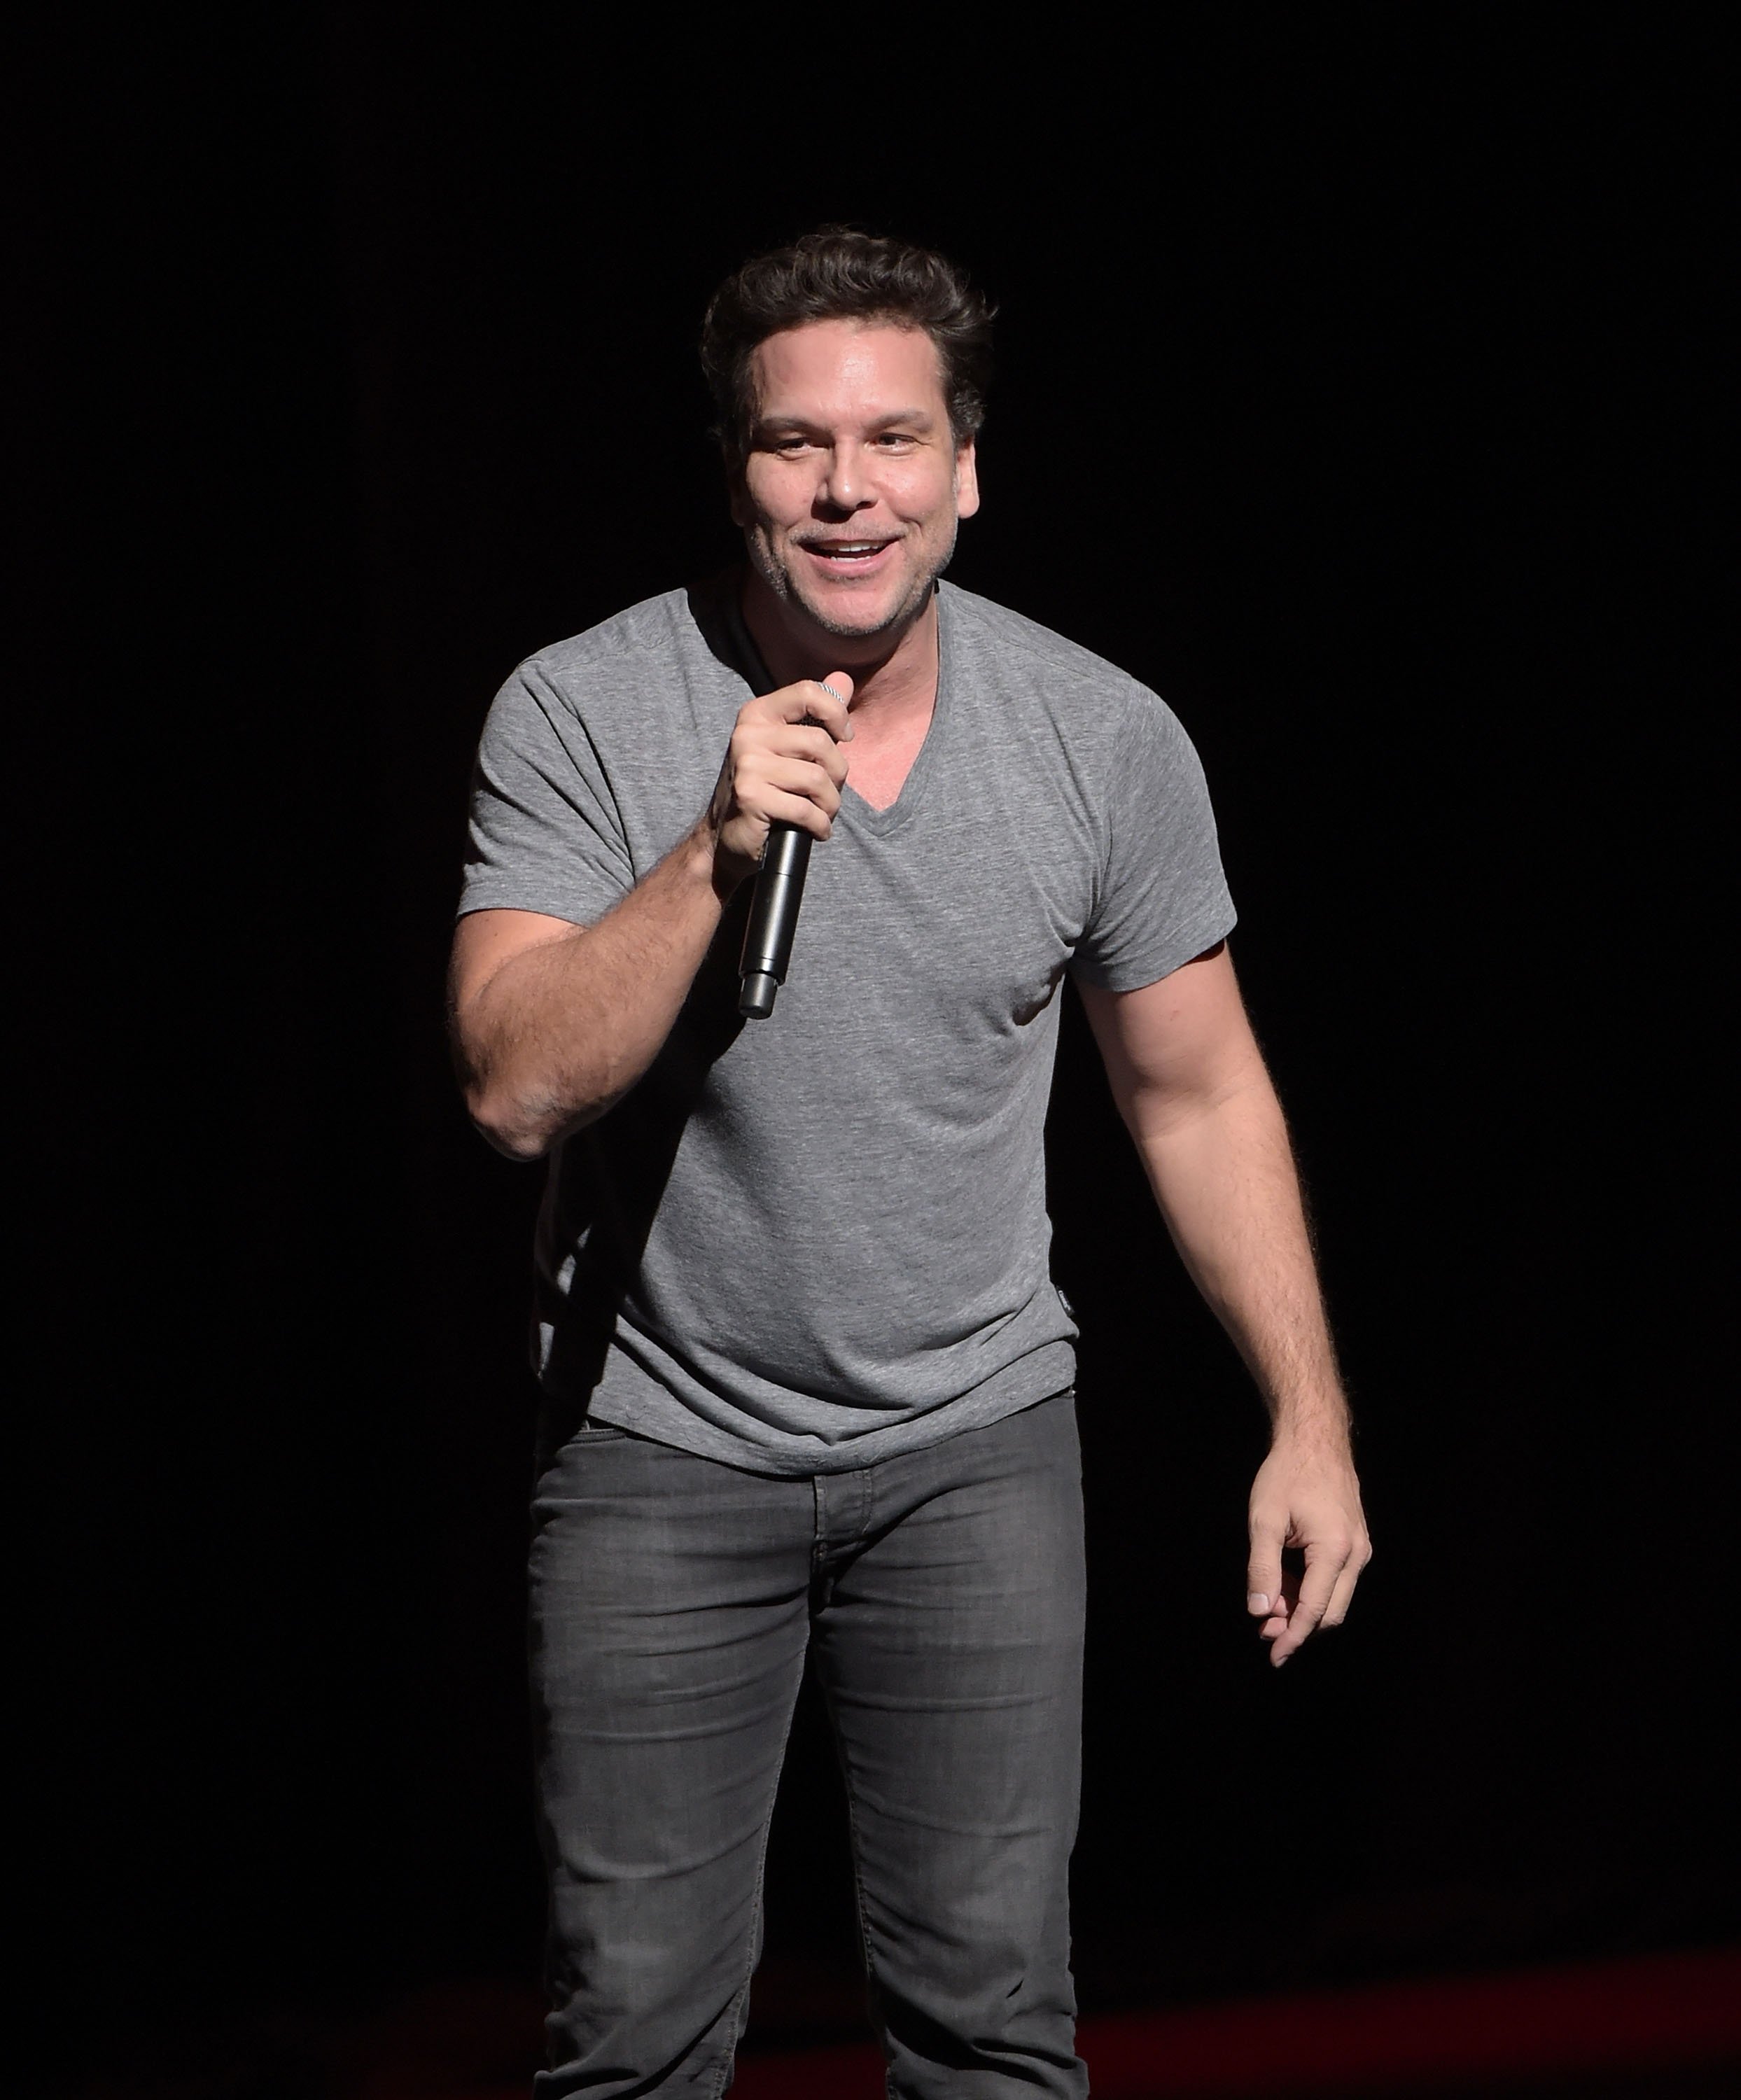 Dane Cook performing during the New York Comedy Festival in New York on November 4, 2016 |  Source: Getty Images 